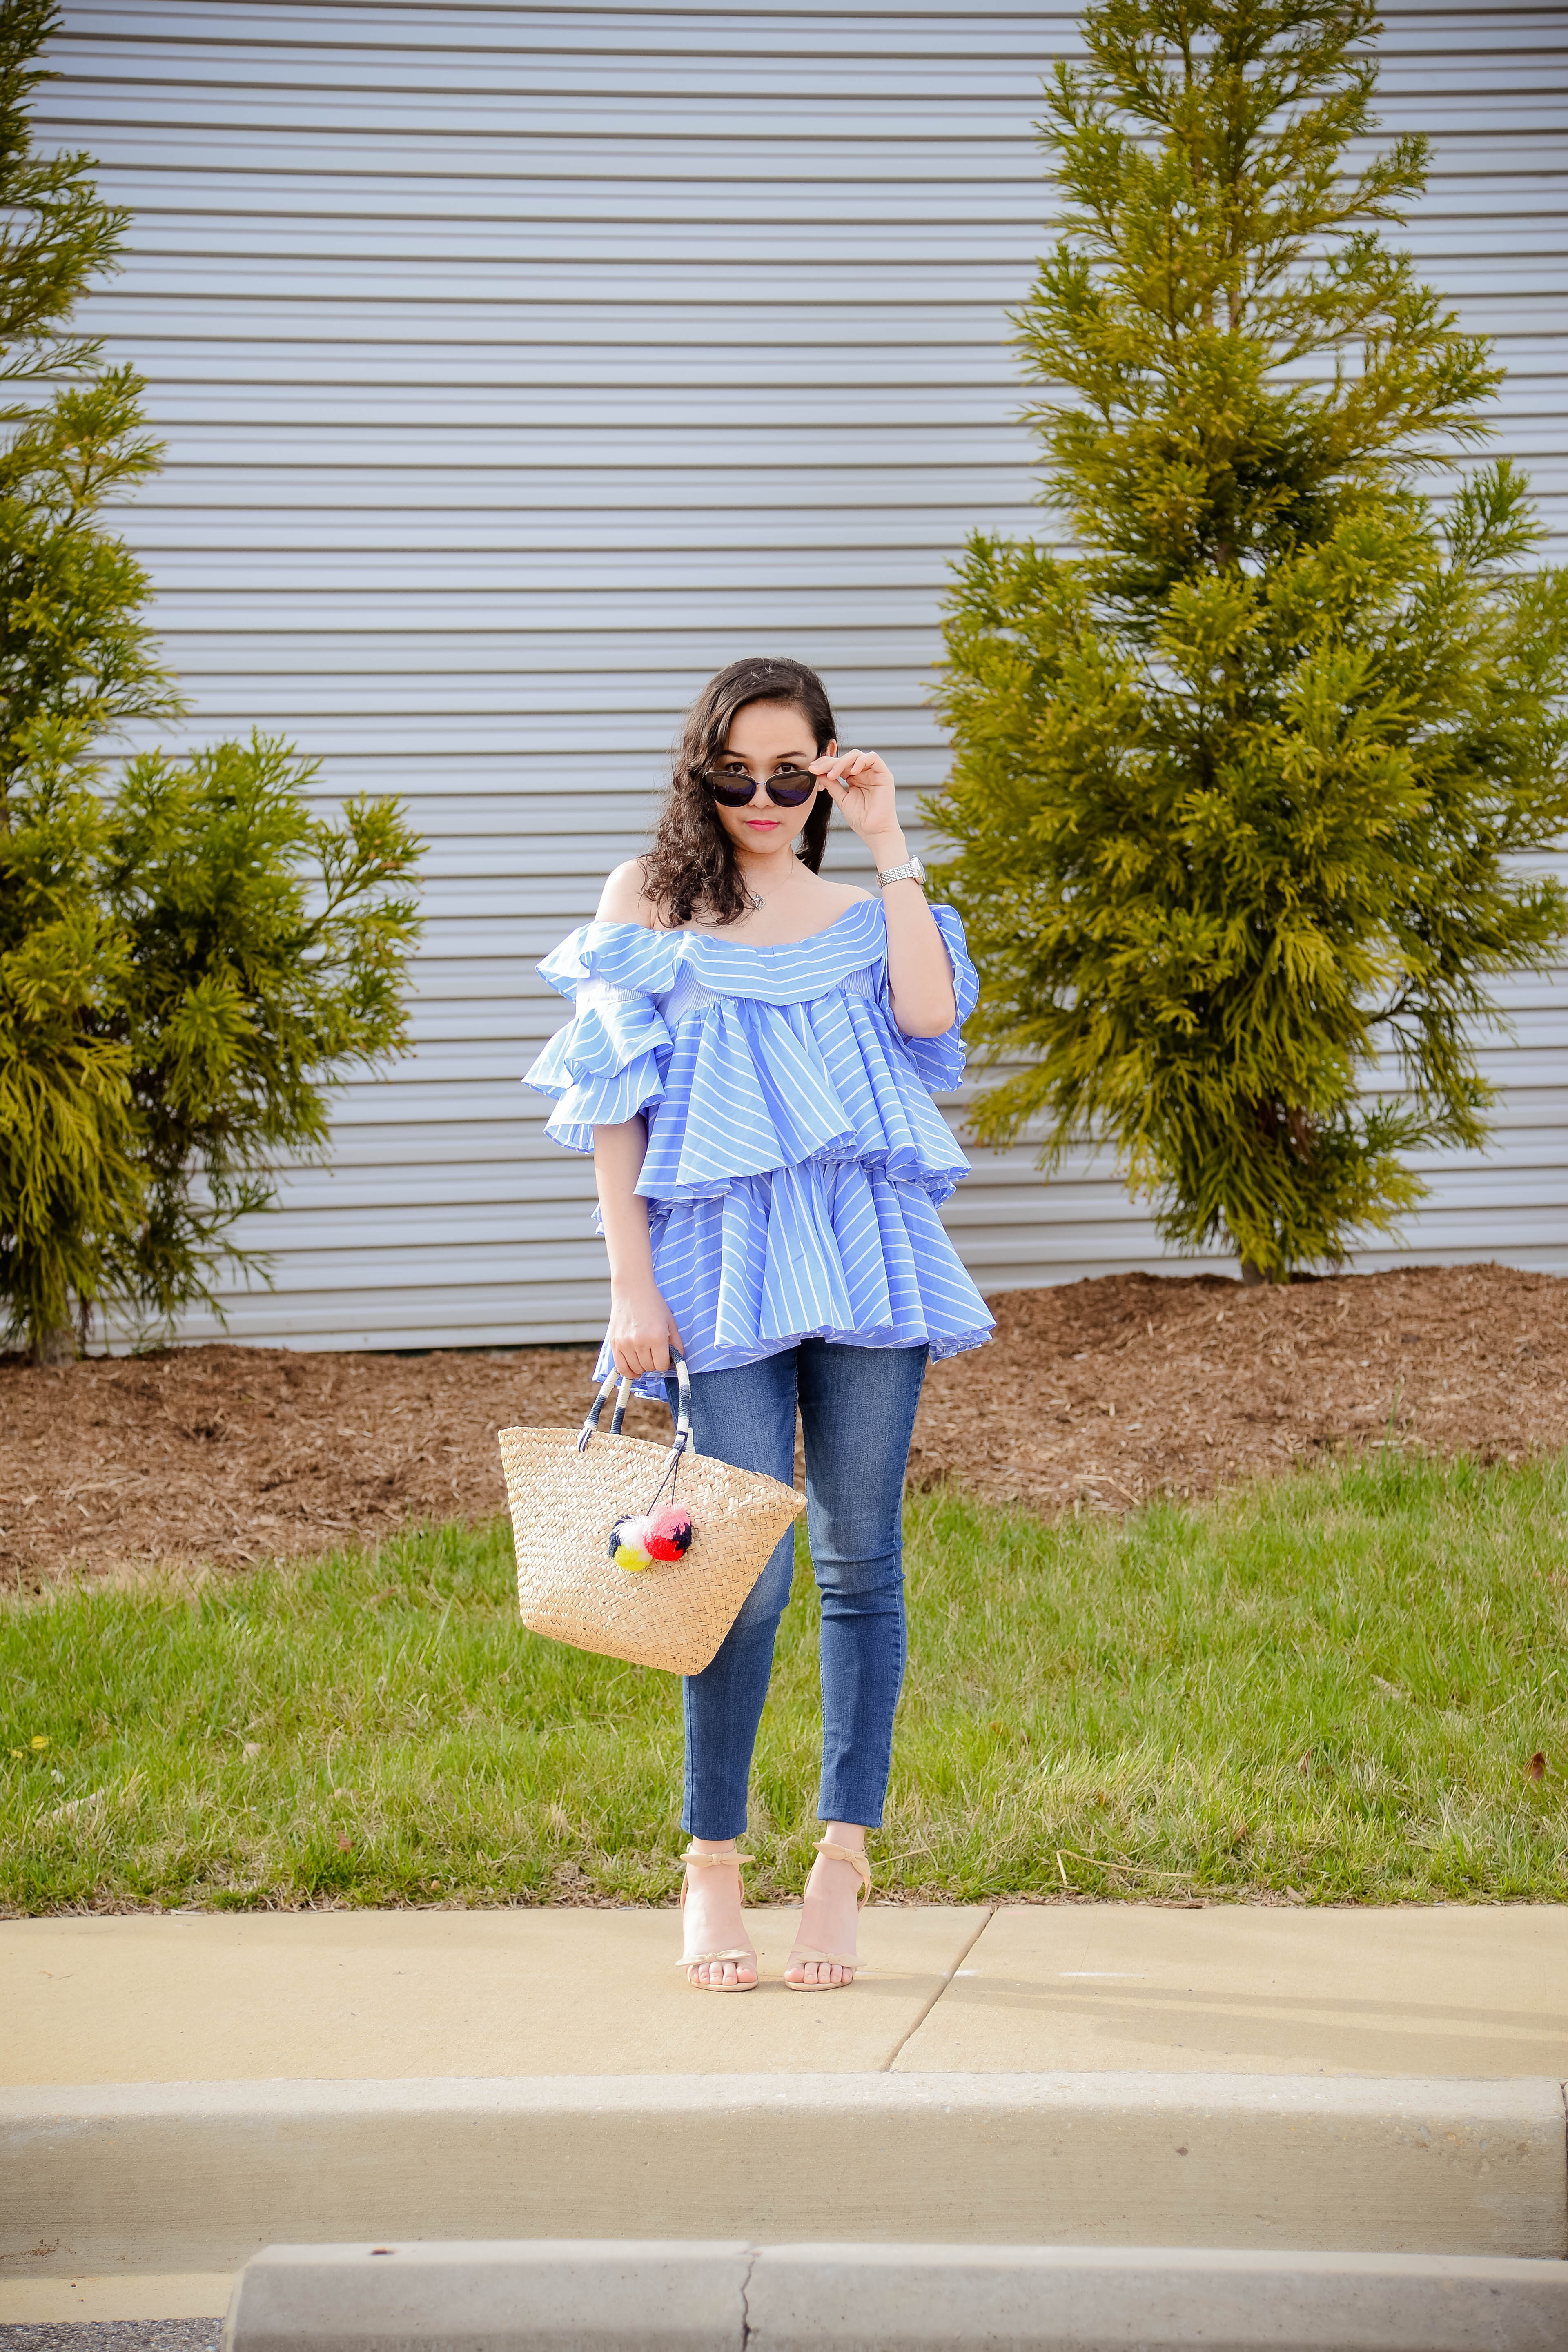 Chic Casual: Tiered Ruffle Striped Top